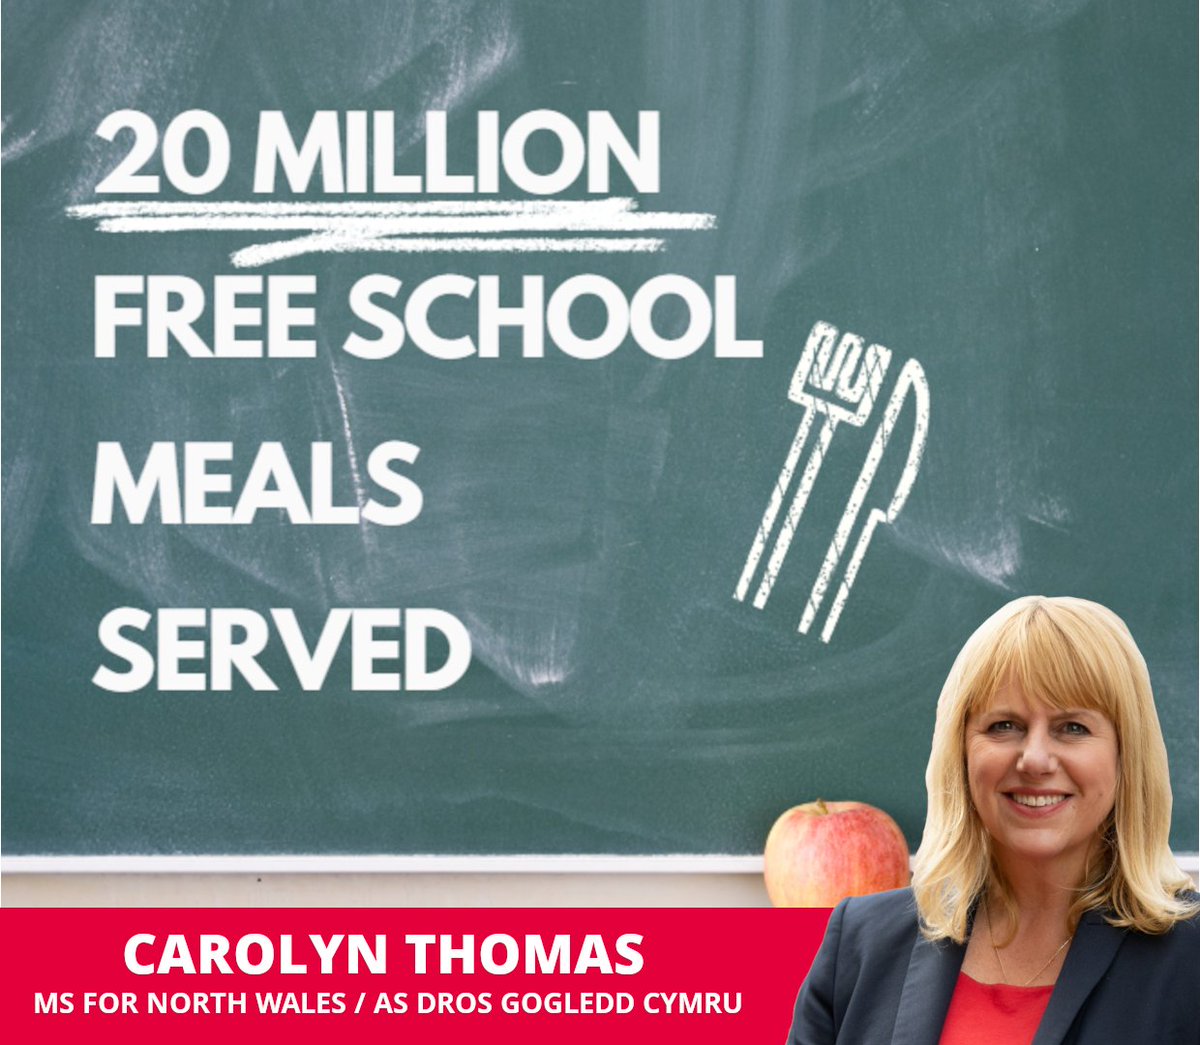 Since the rollout of universal free school meals in September 2022, 20 million free and nutritional meals have now been served to children in Welsh primary schools. This transformational Welsh policy tackles child poverty & allows children to be educated free from hunger.